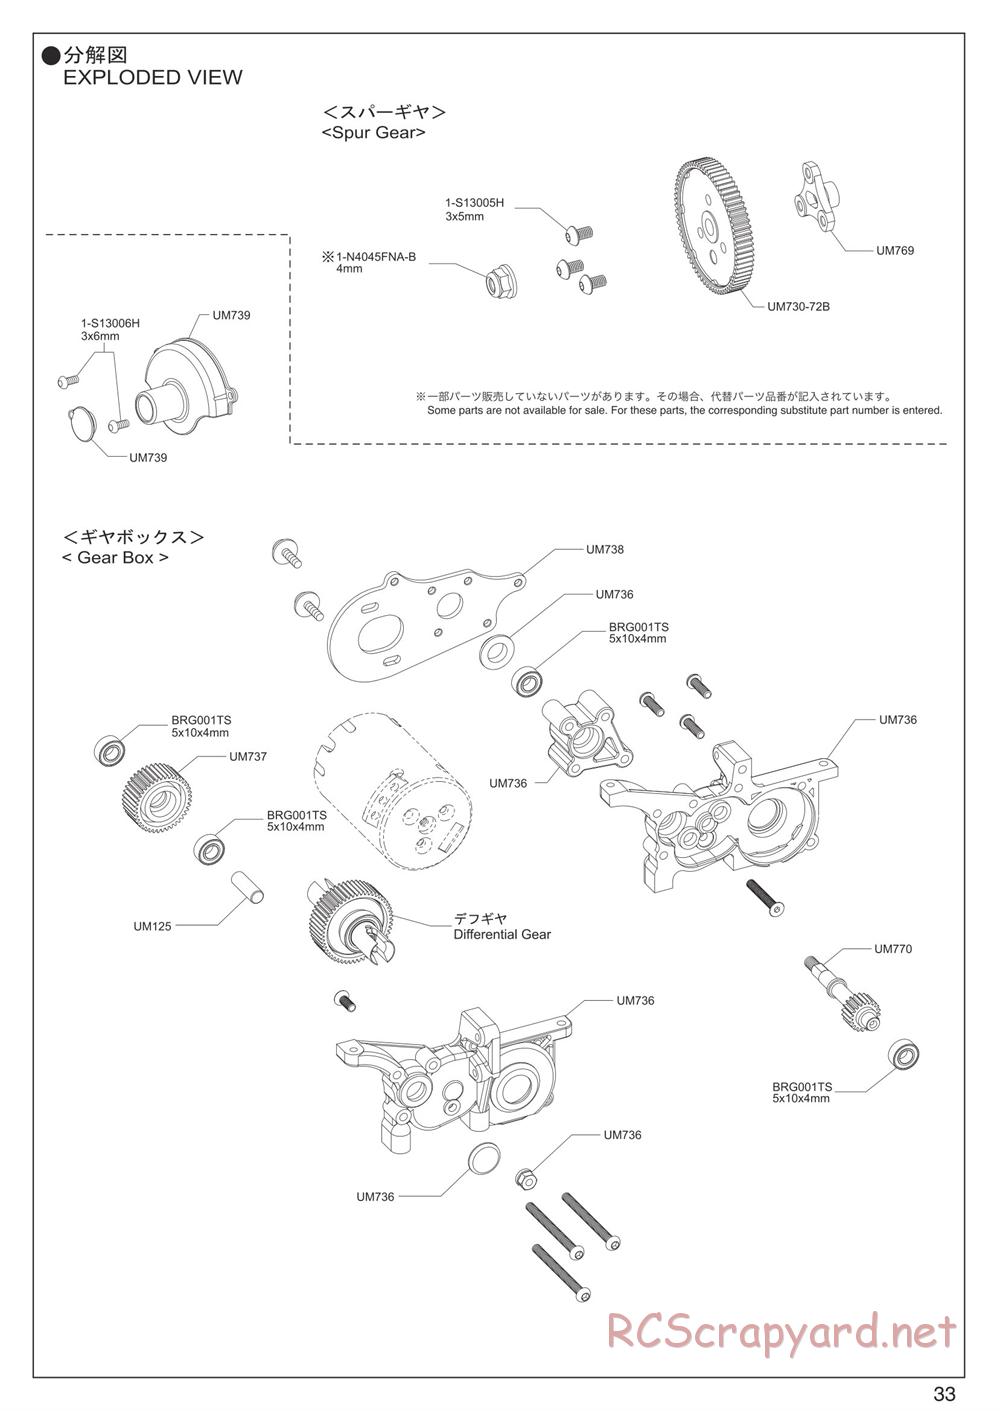 Kyosho - Ultima RB7SS - Exploded Views - Page 3